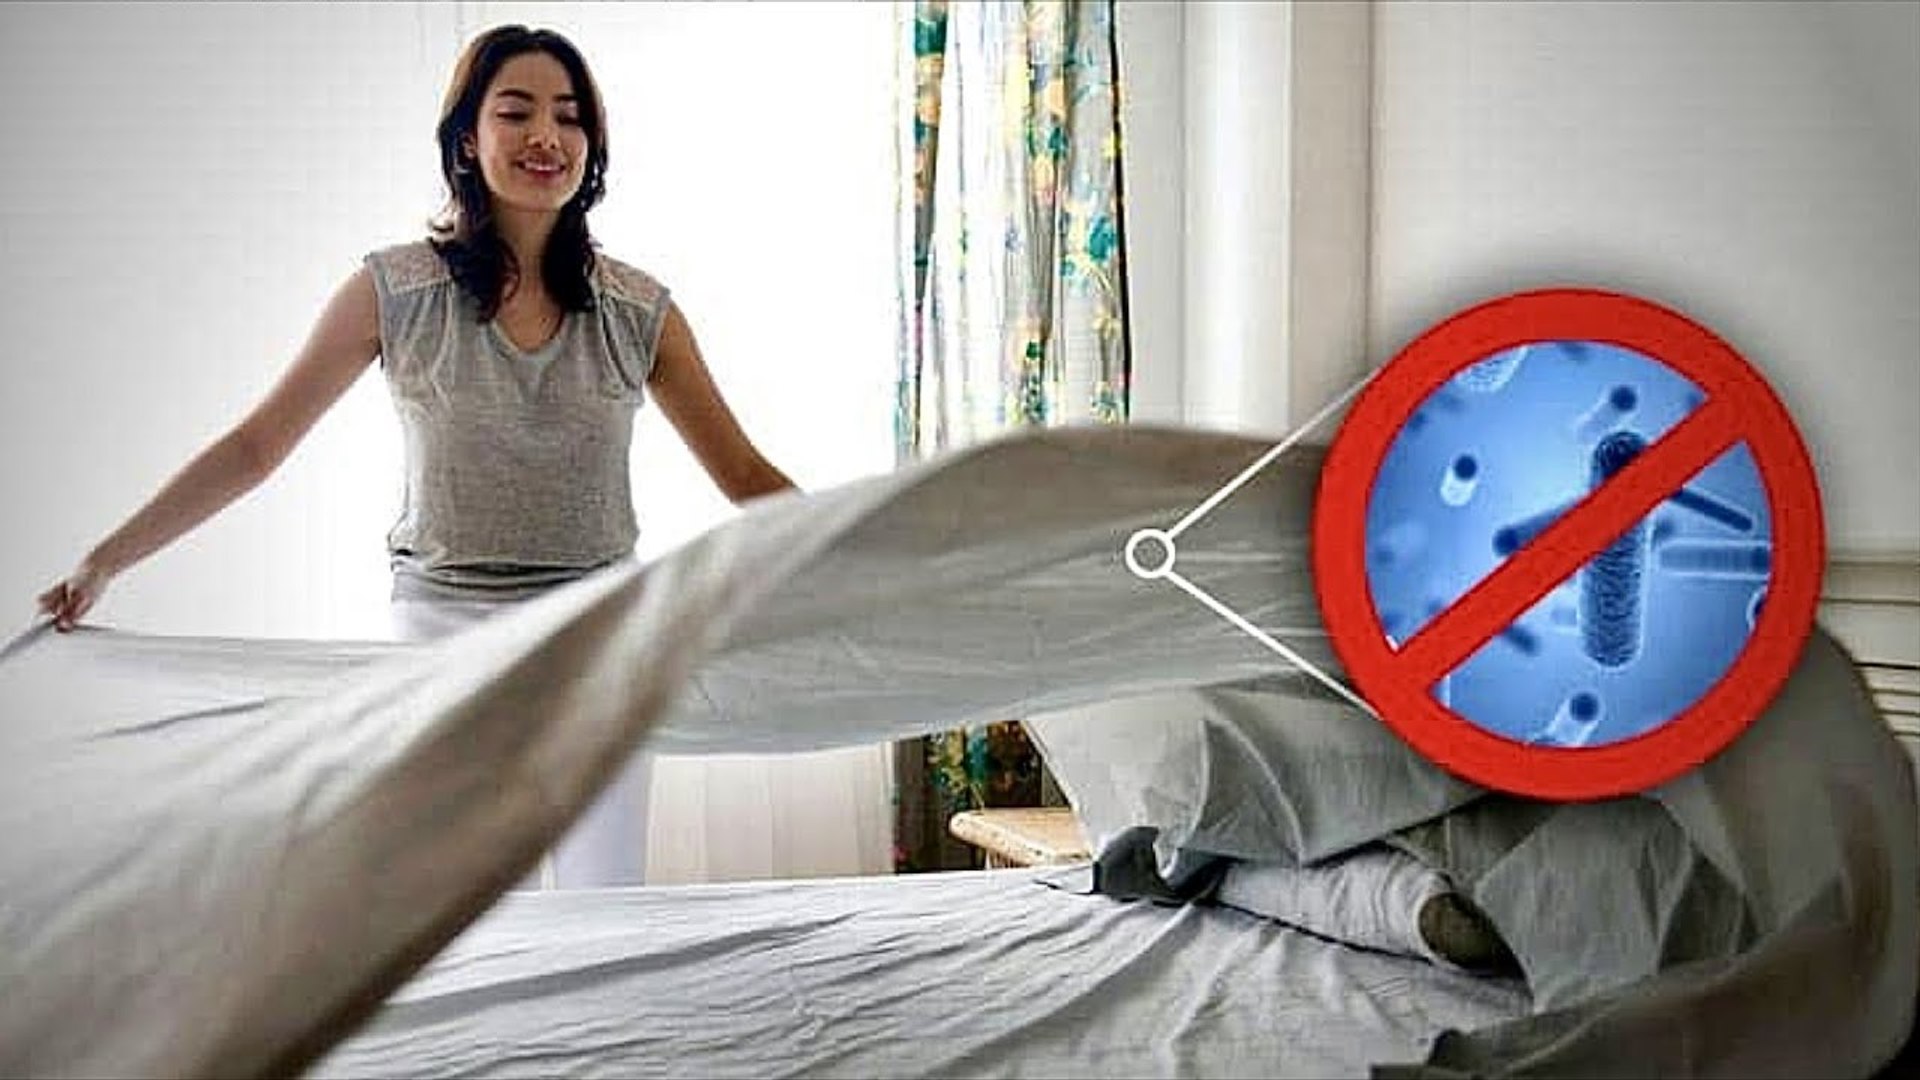 Antimicrobial Bed Sheets - Silver Ion Technology - Miracle Brand - video  Dailymotion